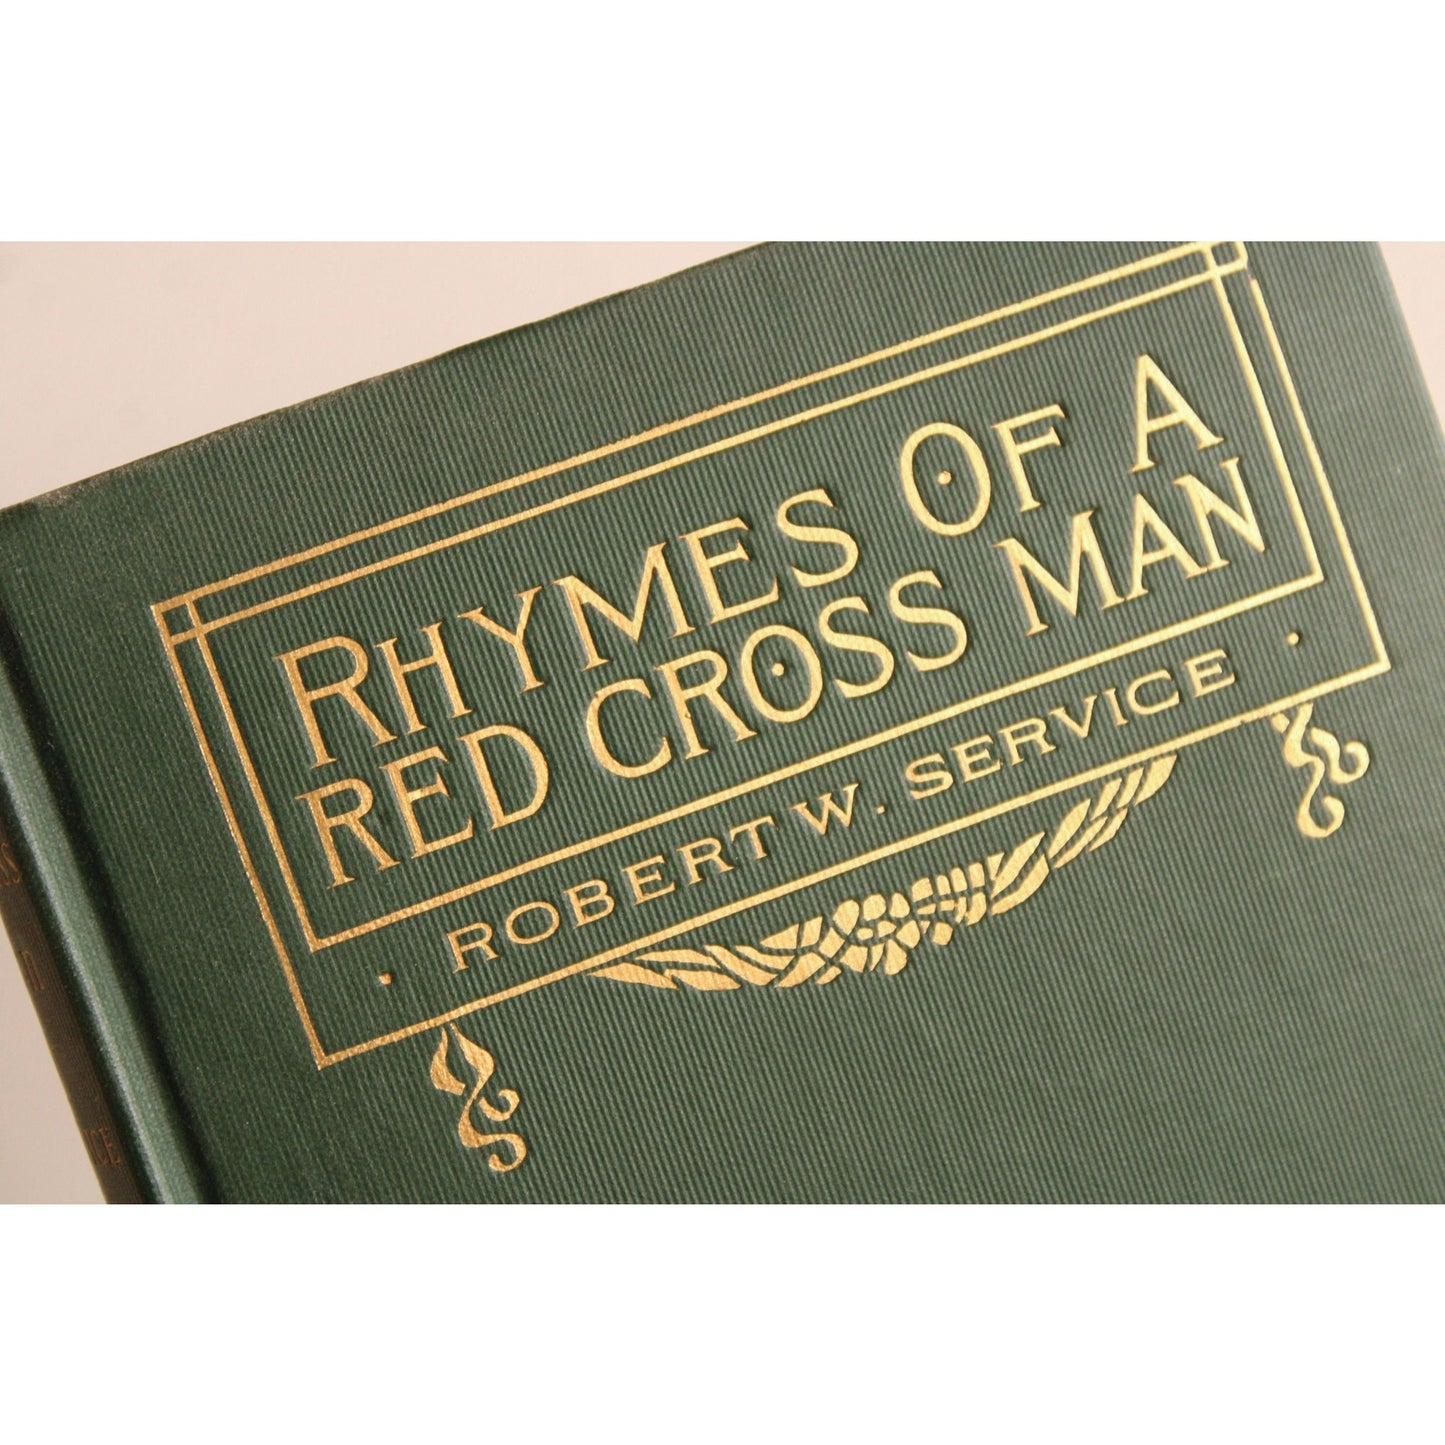 Vintage 1910s Poetry Book by Robert Service, "Rhymes of a Red Cross Man"